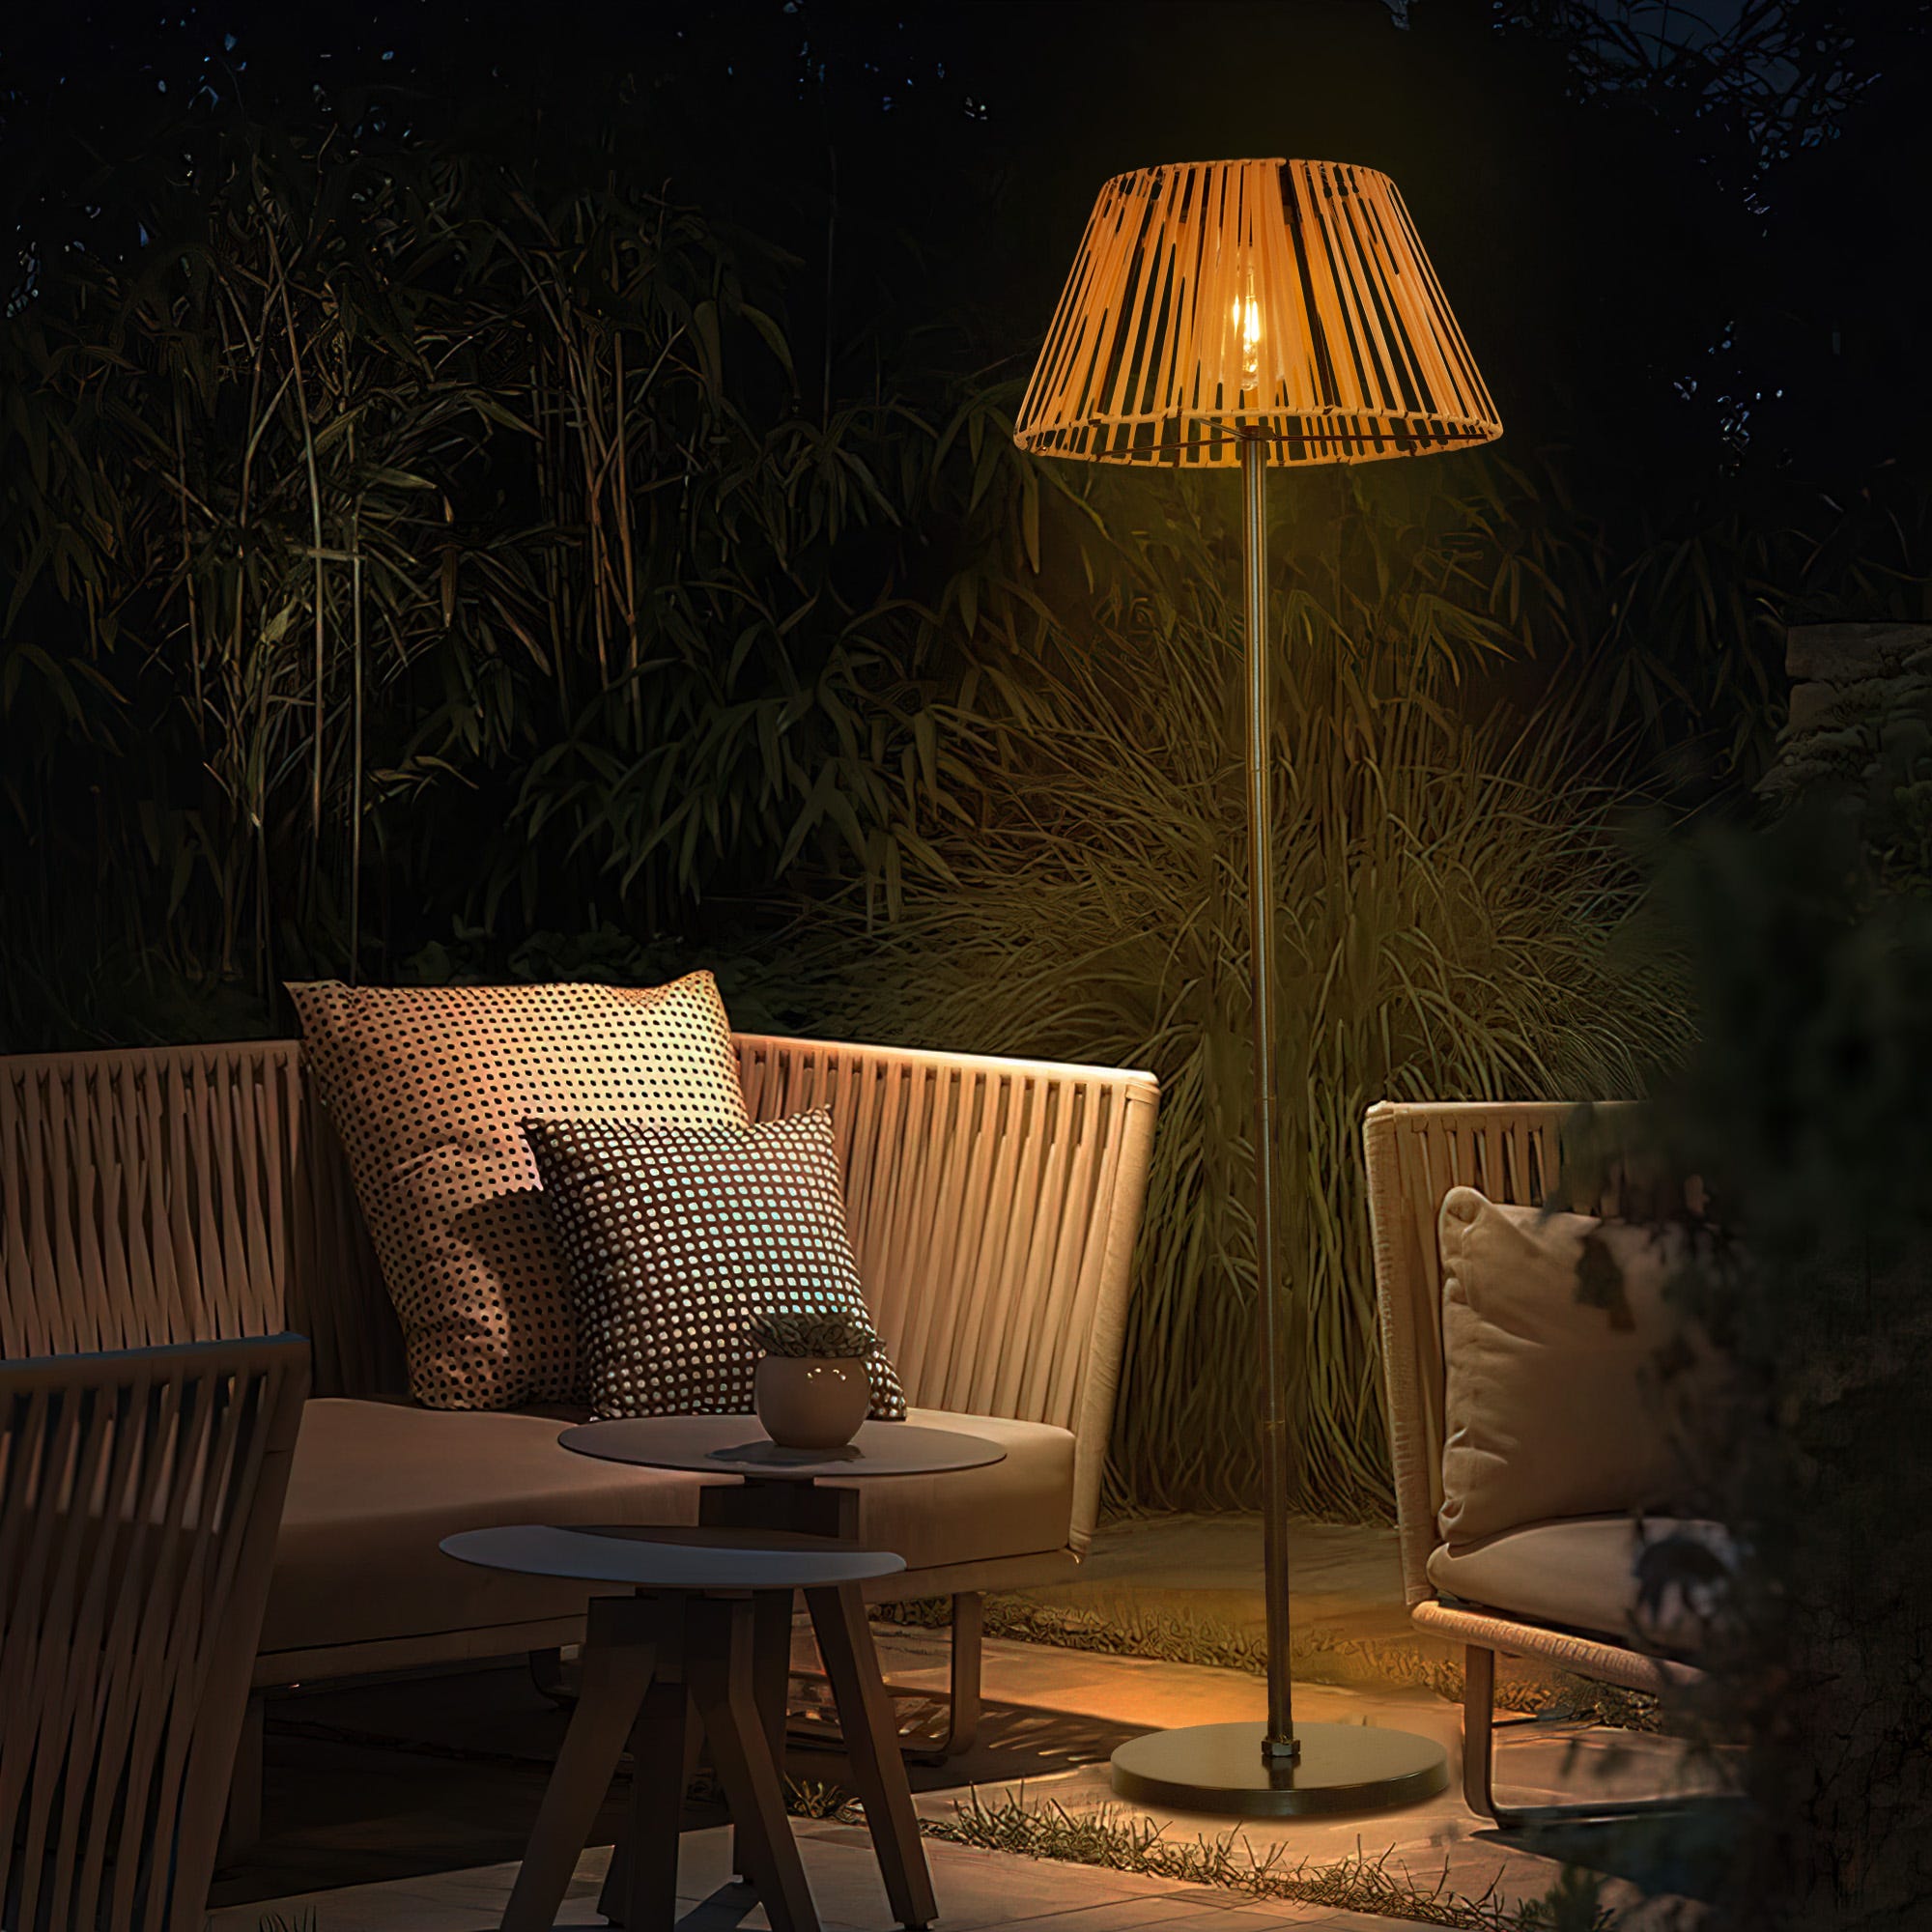 Outdoor furniture including a two-seat sofa with cushions, a side table, and a floor lamp with a warm light.